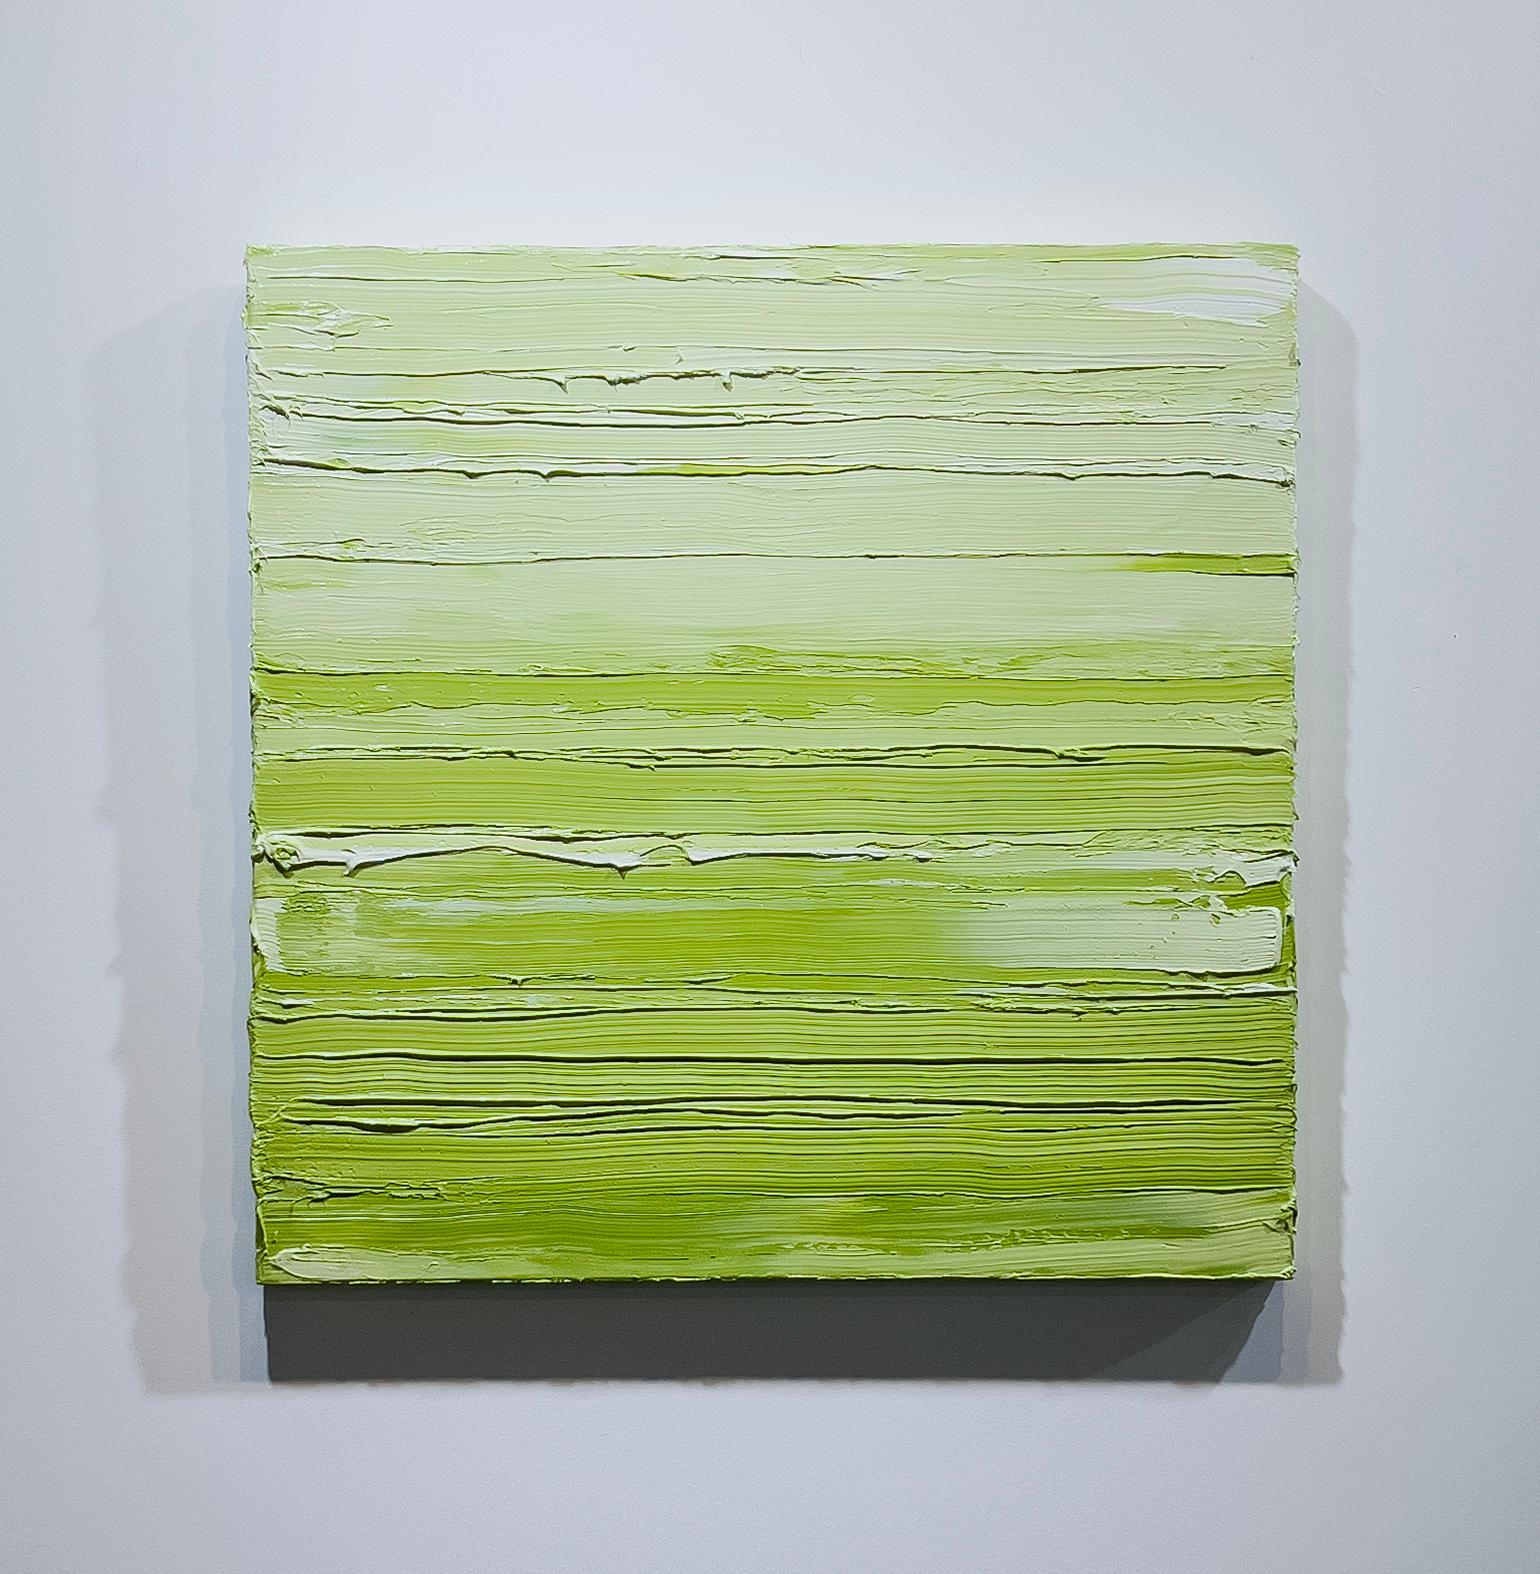 This contemporary abstract painting by Teodora Guererra features a bright green palette. The artist applies thick layers of green paint across the painting in horizontal gestures, giving the surface of the canvas texture in varying tints and shades